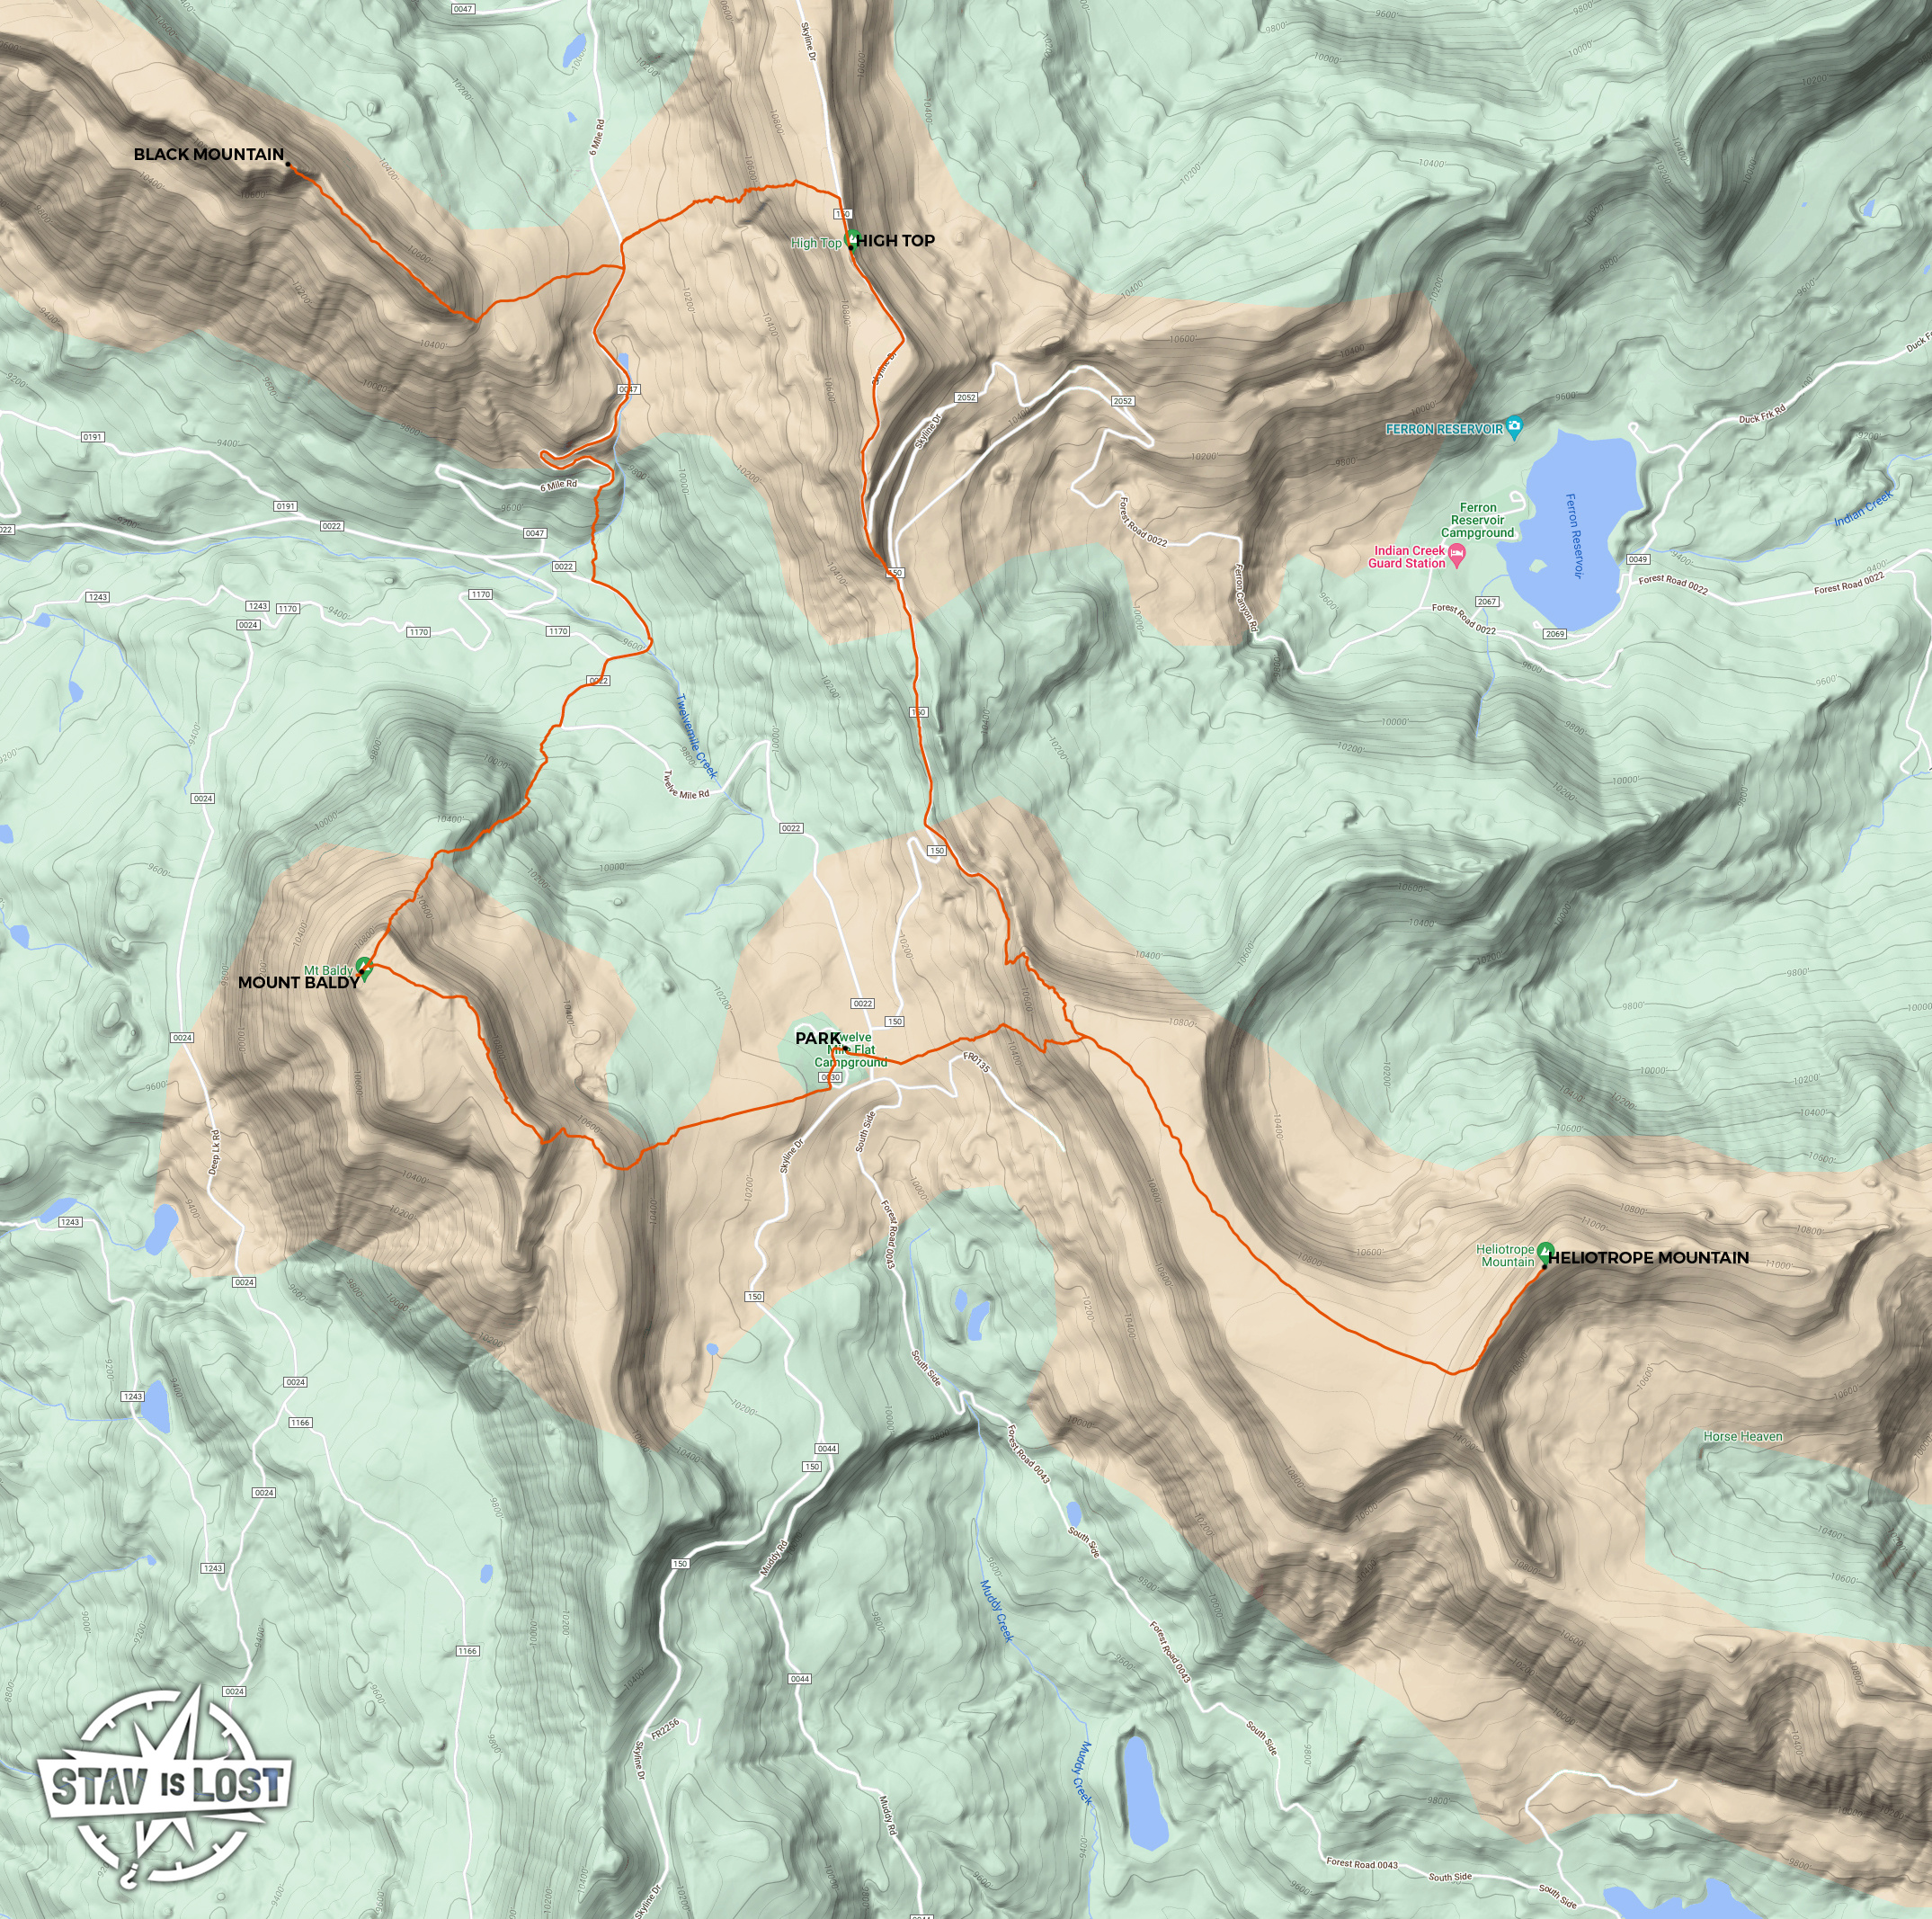 map for Mount Baldy, Black Mountain, High Top, Heliotrope Mountain Loop by stav is lost